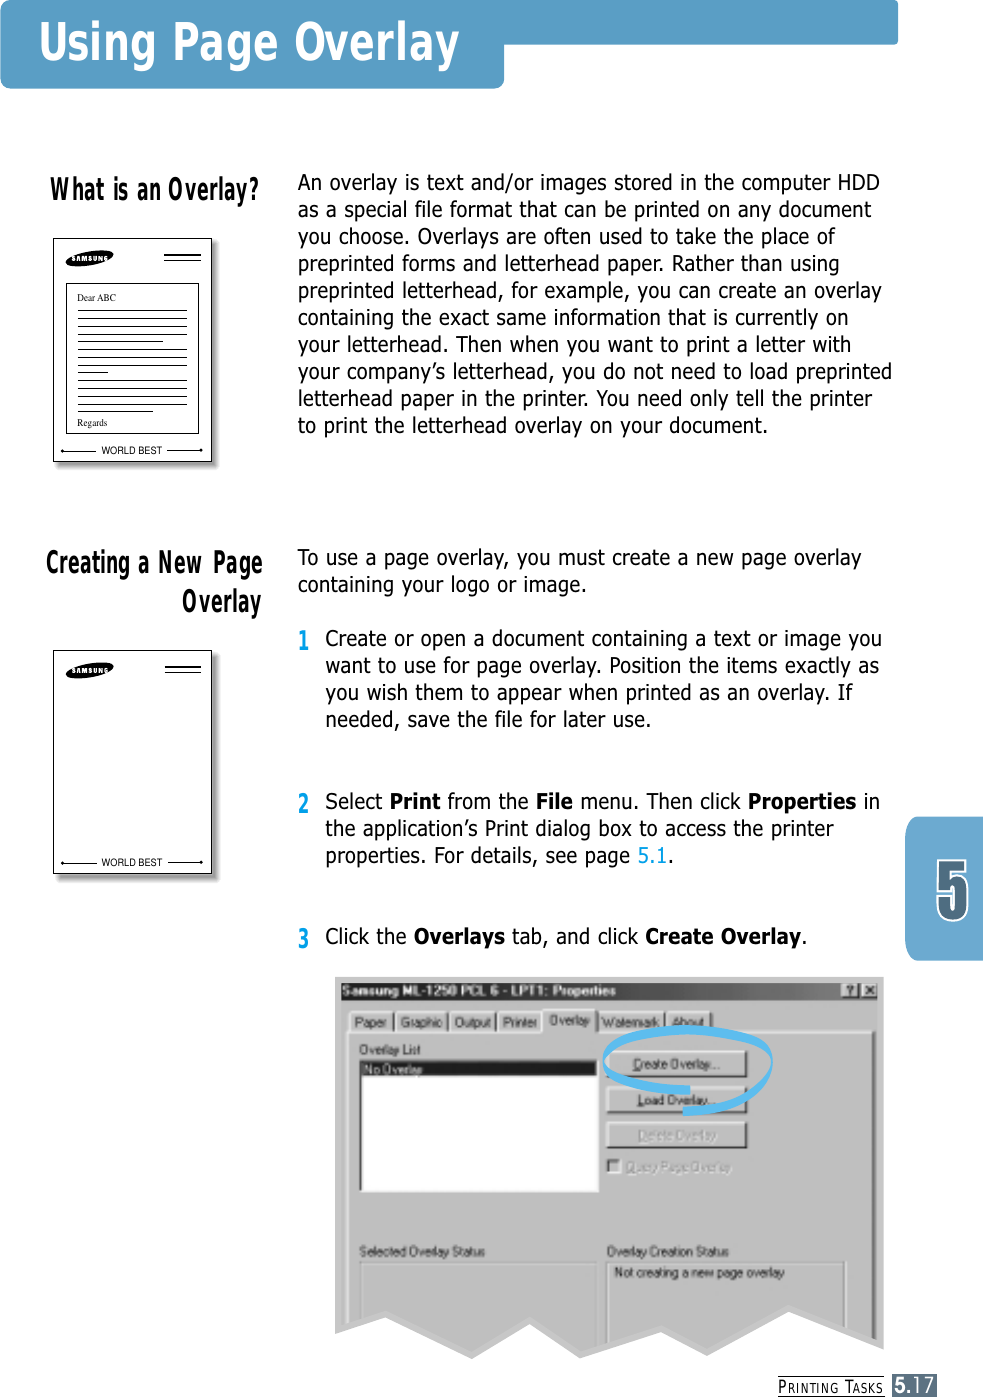 PRINTING TASKS5.17Using Page OverlayAn overlay is text and/or images stored in the computer HDDas a special file format that can be printed on any documentyou choose. Overlays are often used to take the place ofpreprinted forms and letterhead paper. Rather than usingpreprinted letterhead, for example, you can create an overlaycontaining the exact same information that is currently onyour letterhead. Then when you want to print a letter withyour company’s letterhead, you do not need to load preprintedletterhead paper in the printer. You need only tell the printerto print the letterhead overlay on your document.What is an Overlay?WORLD BESTDear ABCRegardsTo use a page overlay, you must create a new page overlaycontaining your logo or image.1Create or open a document containing a text or image youwant to use for page overlay. Position the items exactly asyou wish them to appear when printed as an overlay. Ifneeded, save the file for later use.2Select Print from the File menu. Then click Properties inthe application’s Print dialog box to access the printerproperties. For details, see page 5.1.3Click the Overlays tab, and click Create Overlay.Creating a New PageOverlayWORLD BEST